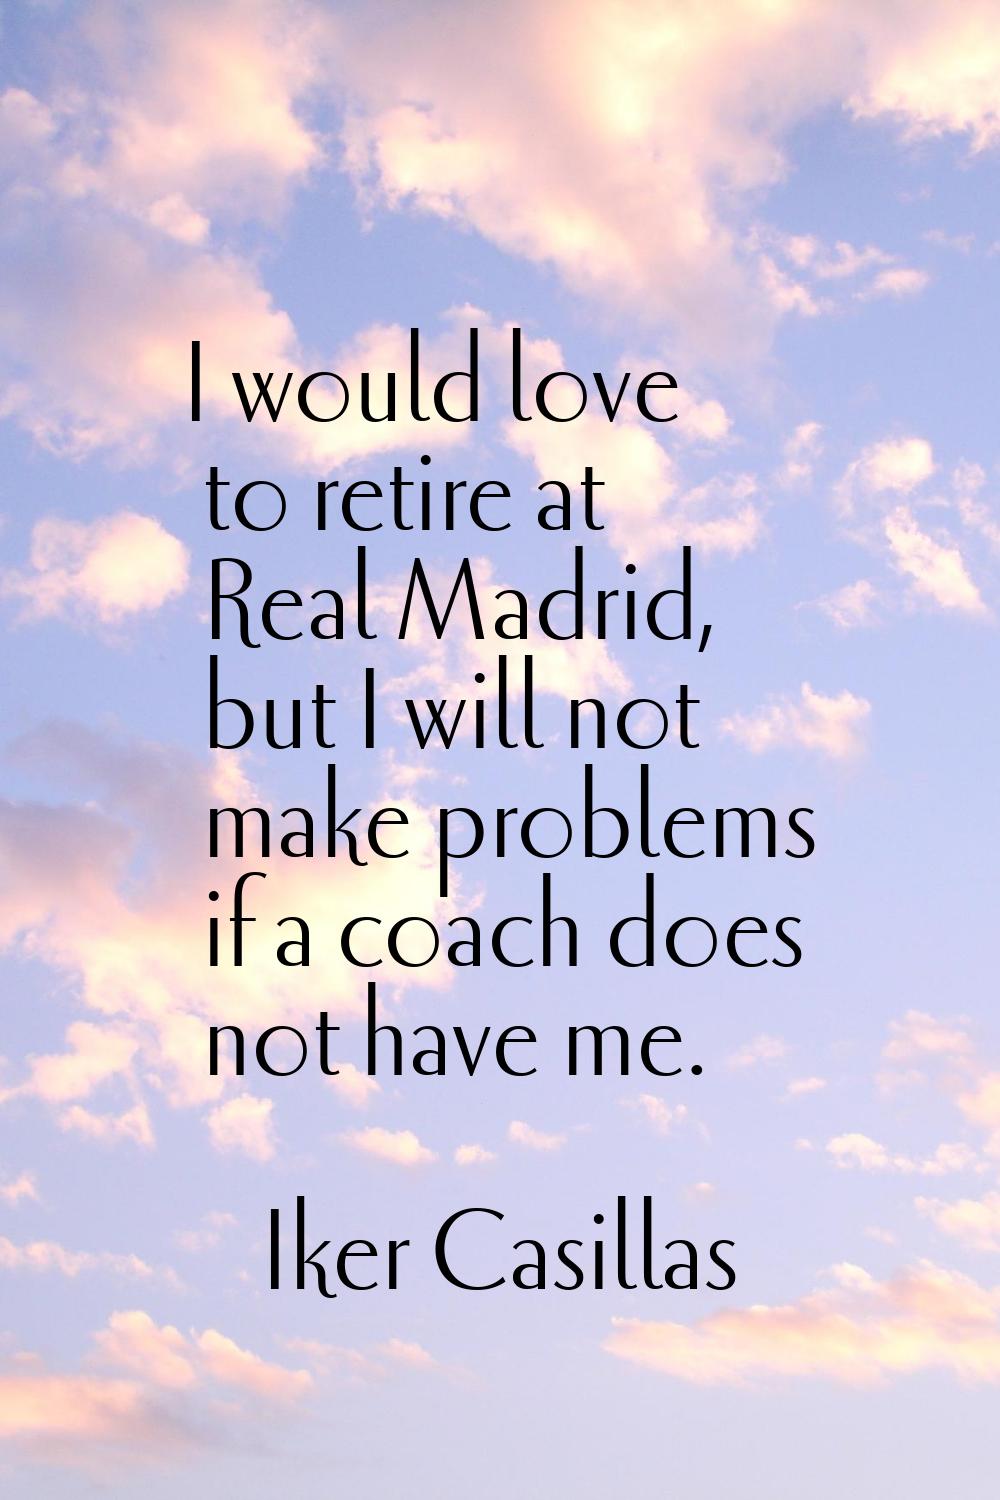 I would love to retire at Real Madrid, but I will not make problems if a coach does not have me.